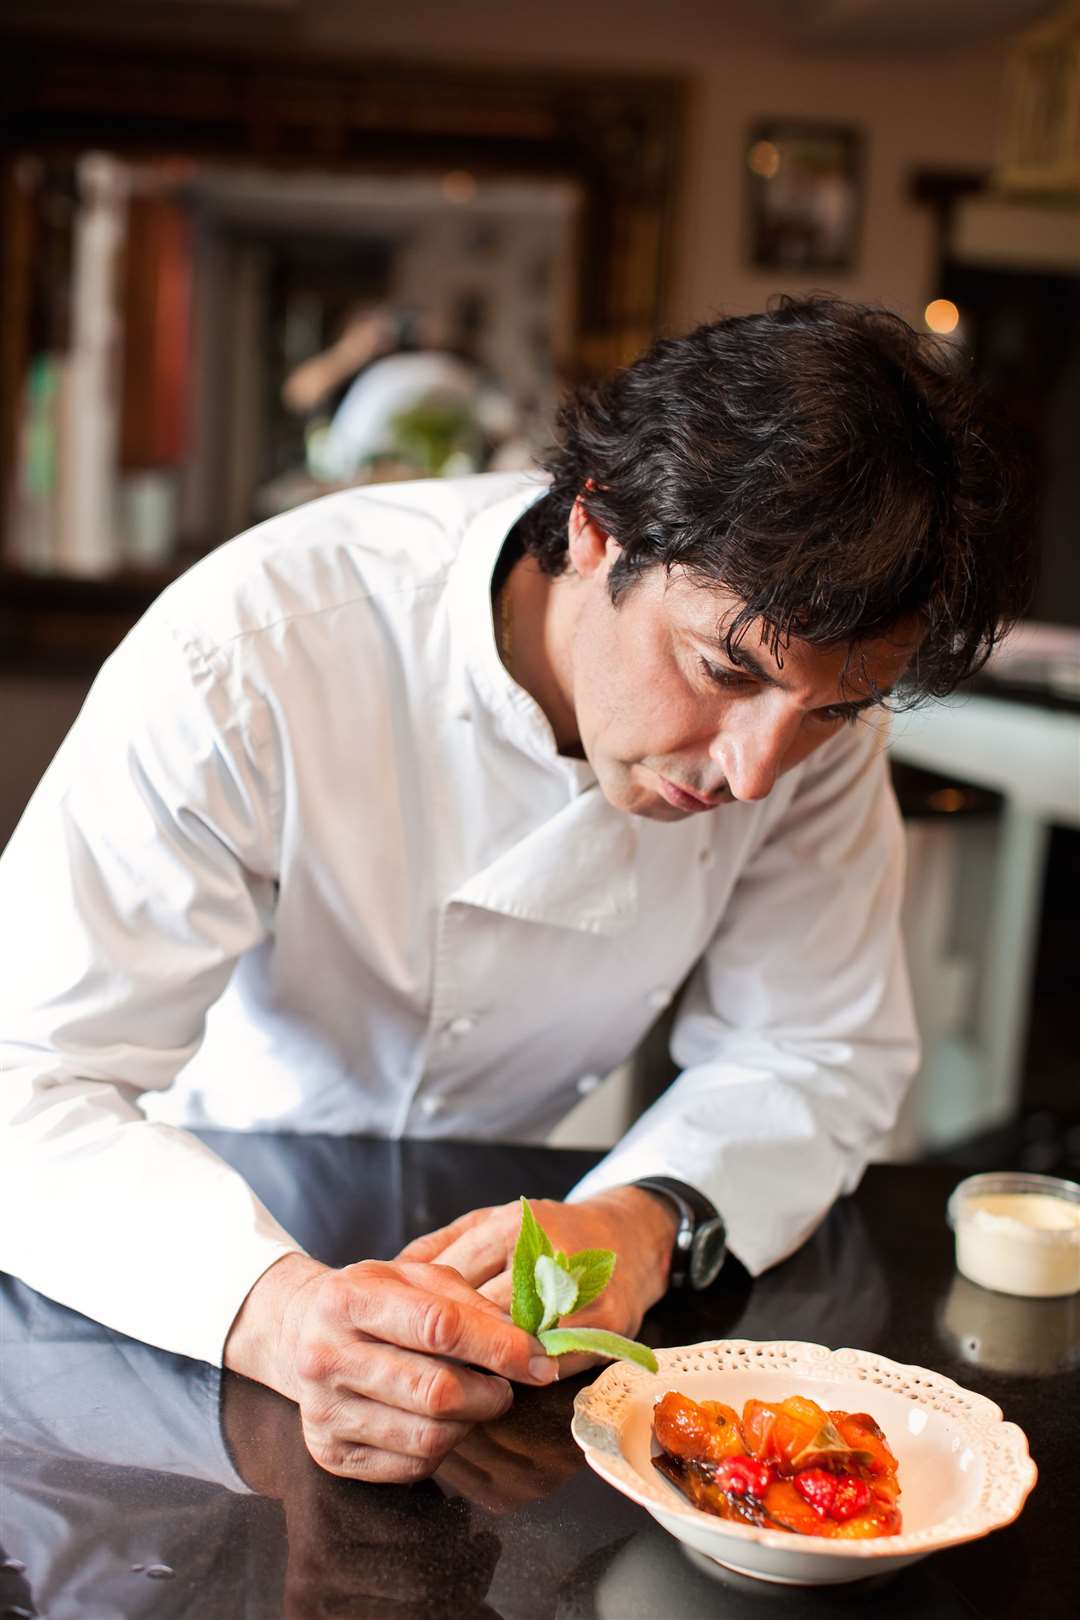 Jean-Christophe Novelli says he is honoured to have been invited to take part in Taste North.